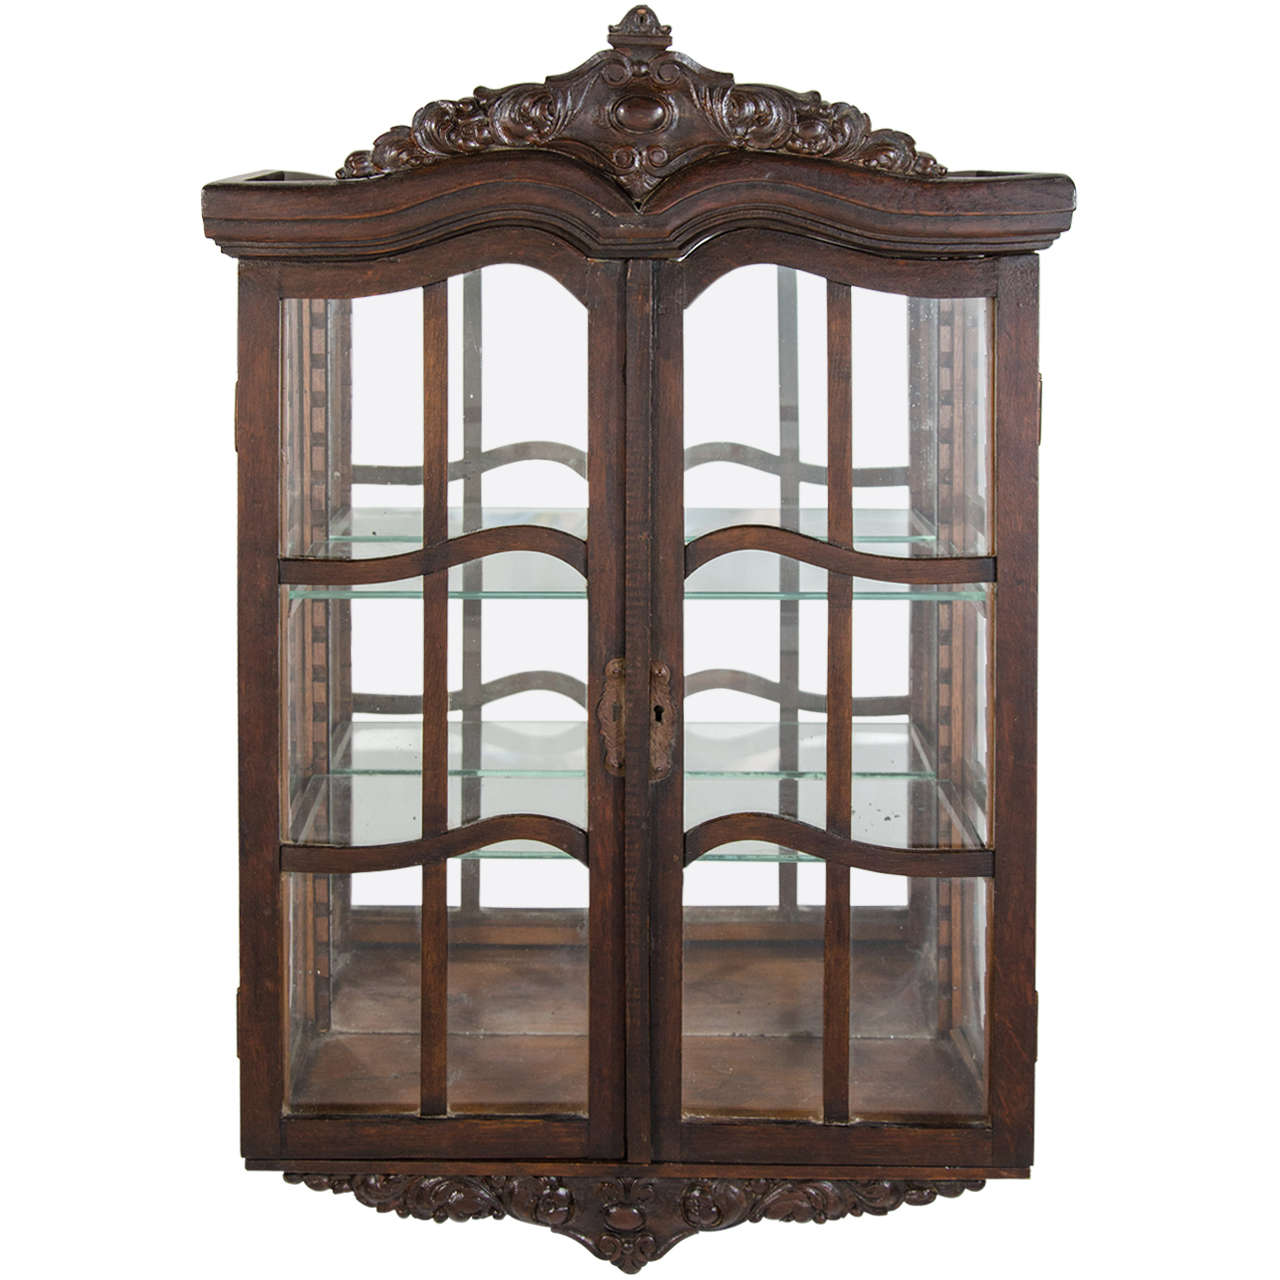 Victorian Antique Curio Cabinet With Hand Carved Wood Designs Bei